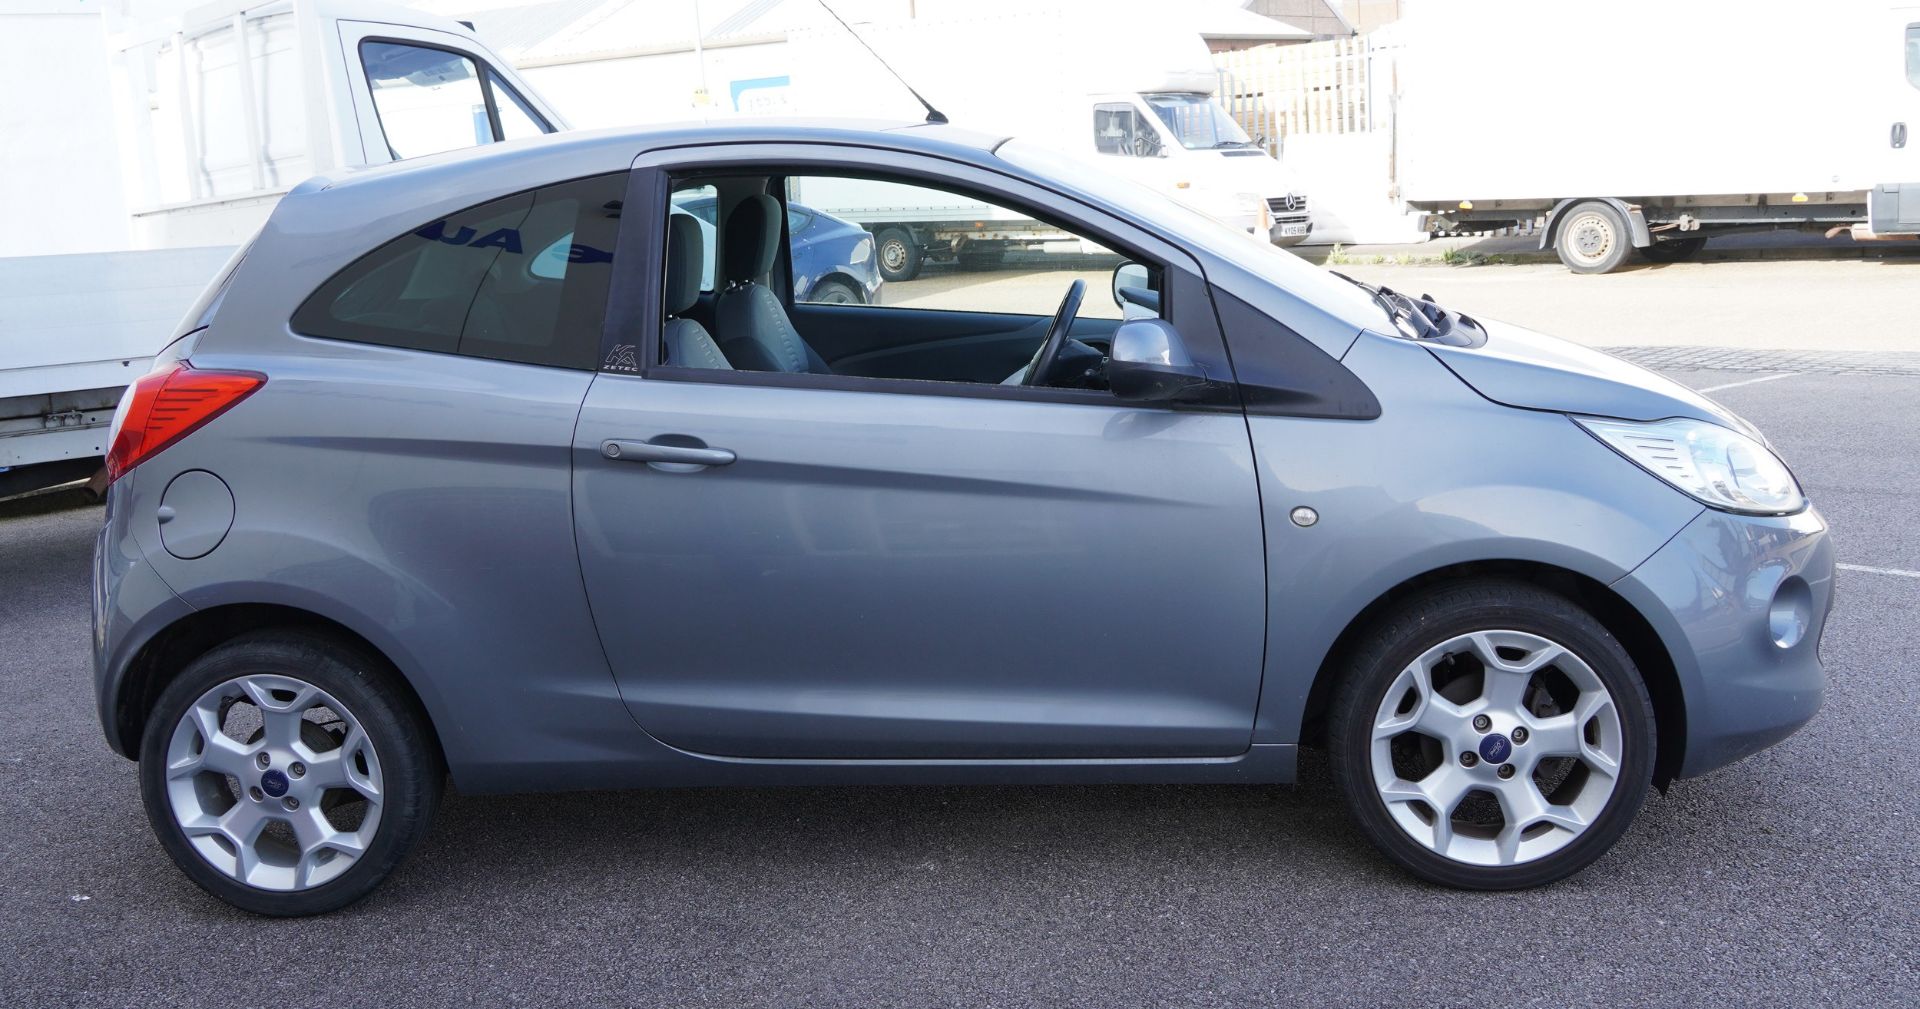 2015 manual Ford KA Zetec. 1.2 petrol three door hatchback, Reg GX15 YGV, One owner from new, 7434 - Image 5 of 15